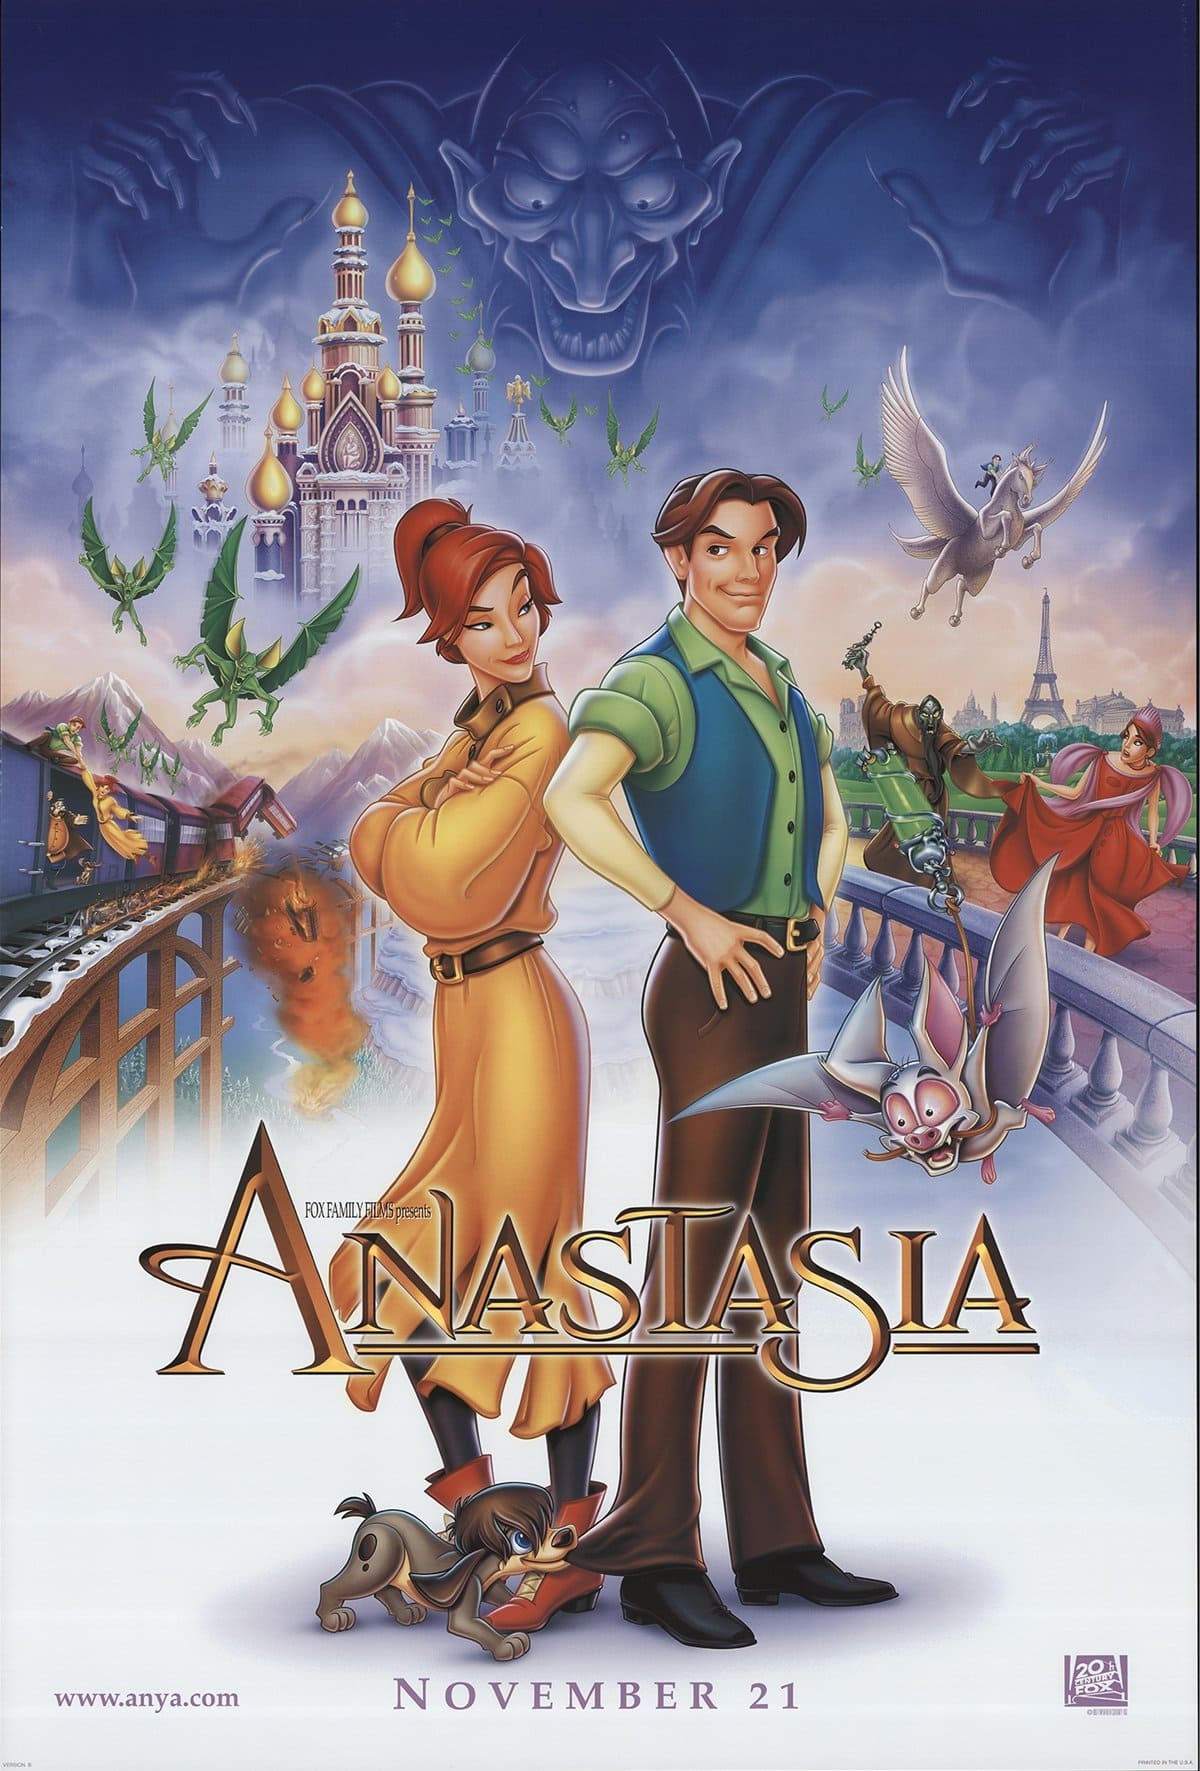 Kirsten Dunst provided the speaking voice for young Anastasia in the 1997 American animated musical drama film Anastasia